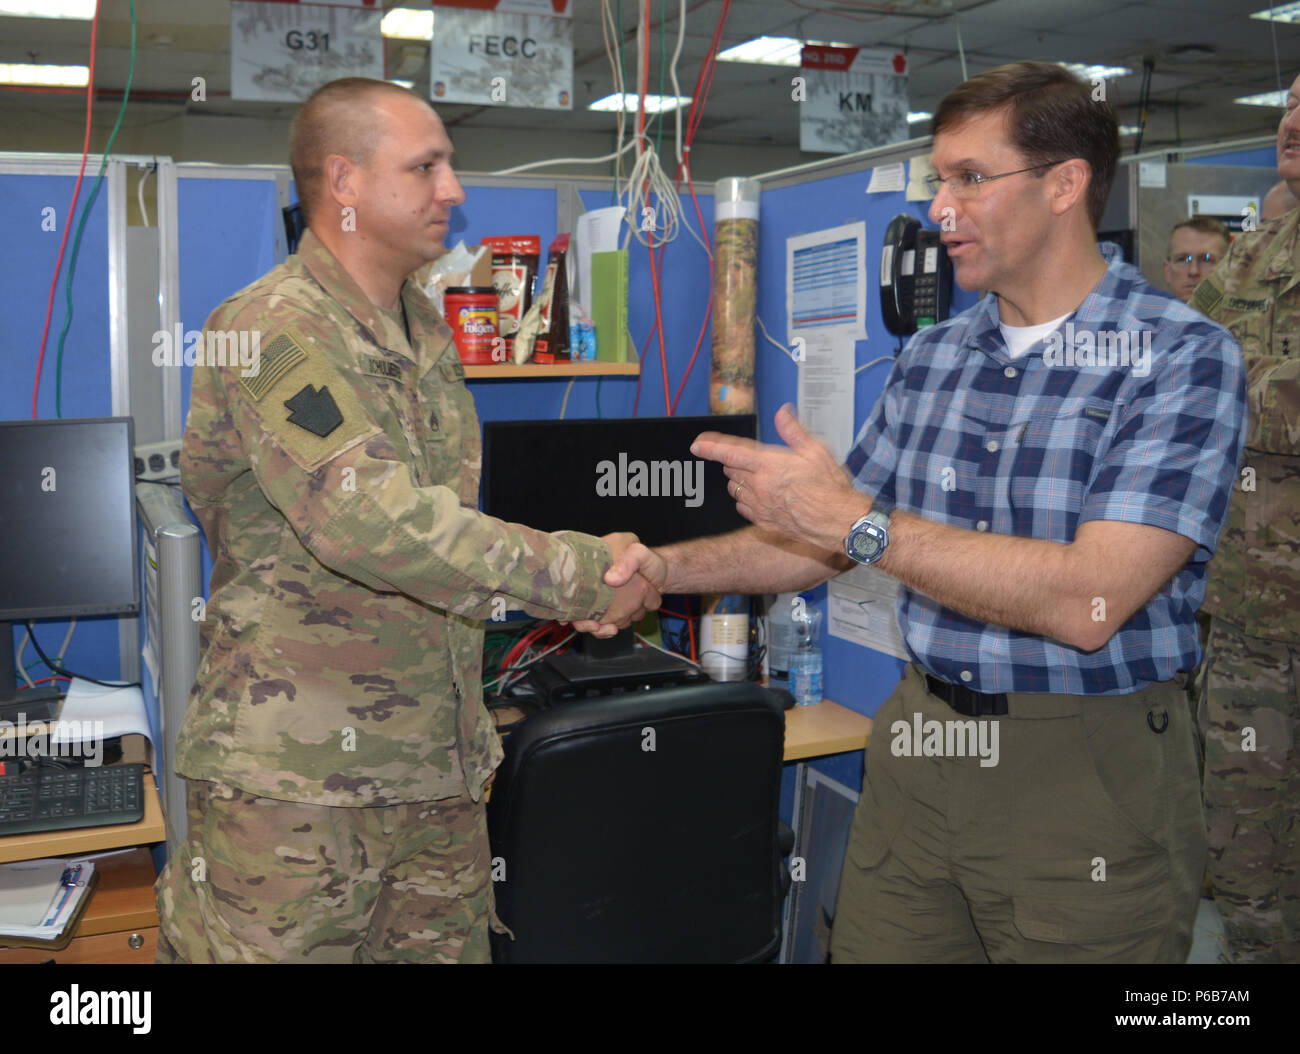 CAMP ARIFJAN, Kuwait — Secretary of the Army Dr. Mark Esper presents a coin to Staff Sgt. Justin Schulmeister, space operations noncommissioned officer, 28th Infantry Division, on June 21, 2018. Schulmeister was recognized for his successful integration of space operations into the Task Force Spartan mission. (U.S. Army photo by Lt. Col. Keith Hickox) Stock Photo